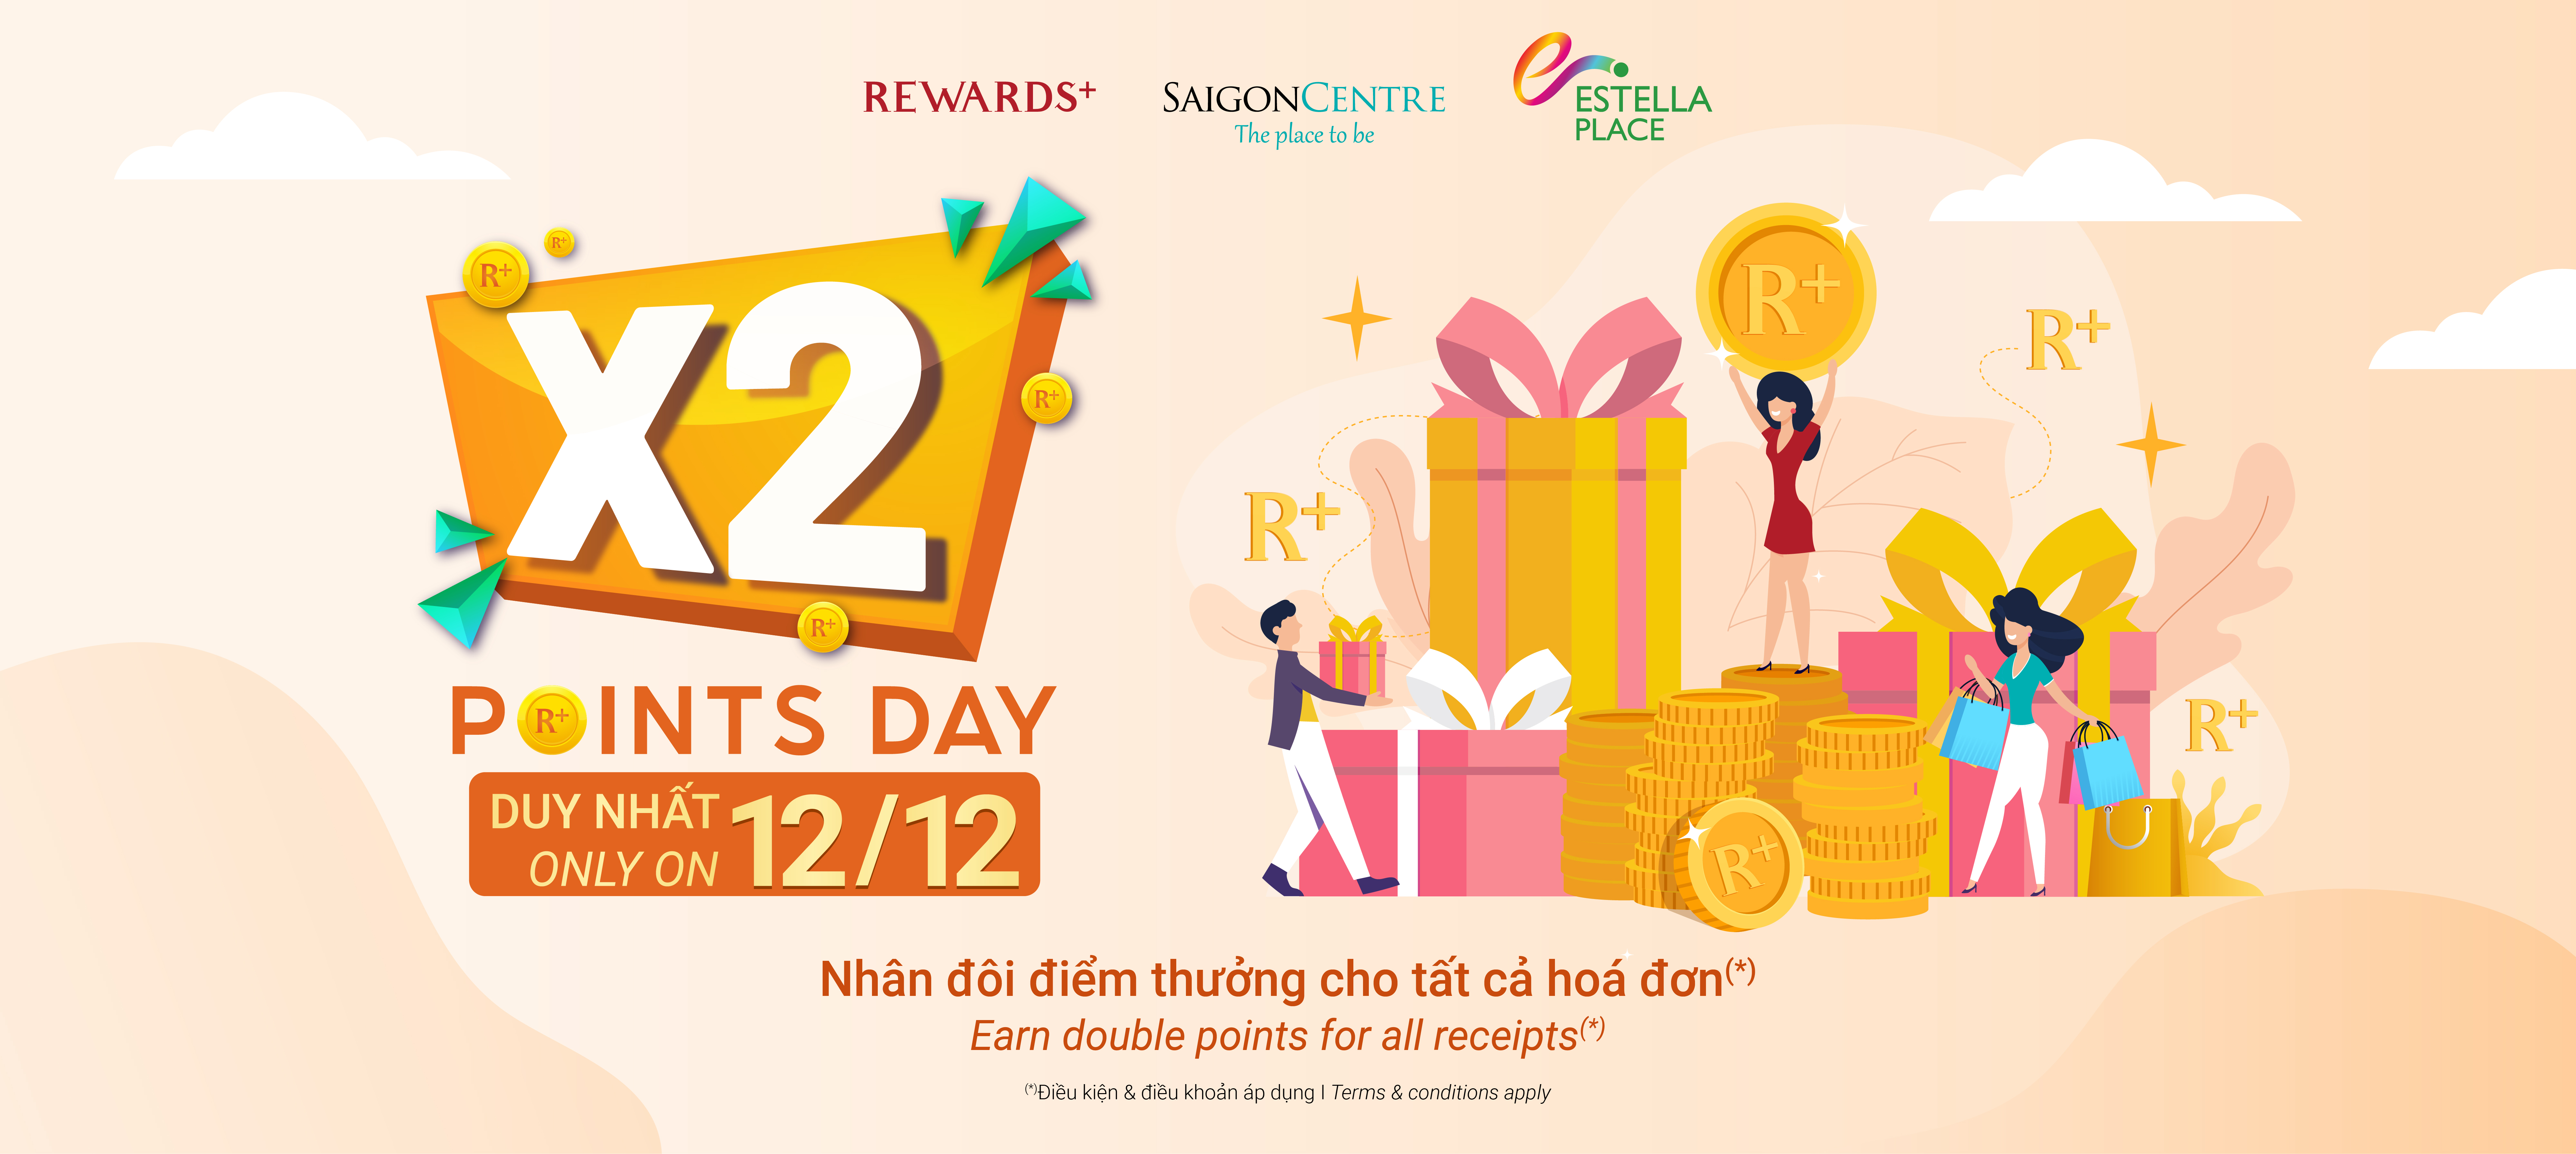 EARN DOUBLE POINTS FOR ALL RECEIPTS ON 12/12